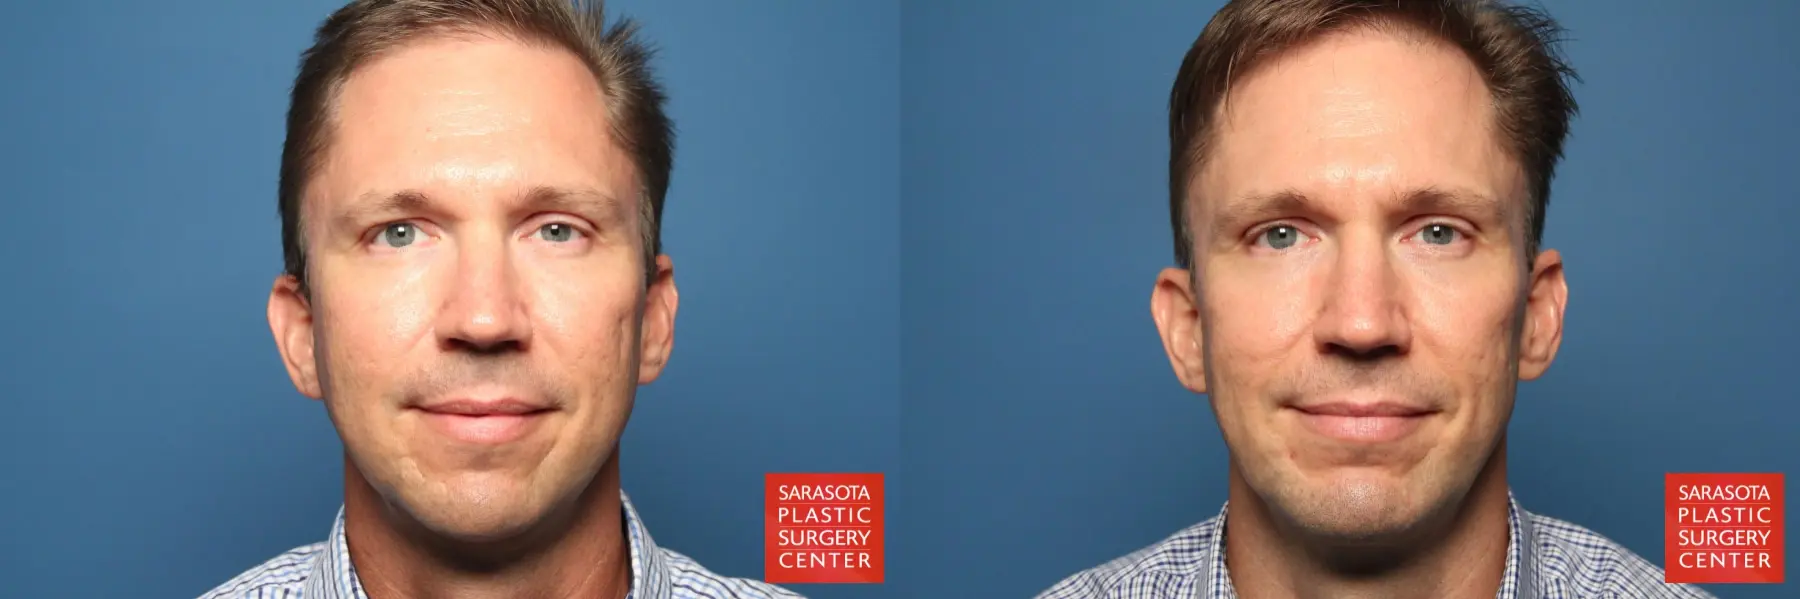 Chin Augmentation: Patient 1 - Before and After  